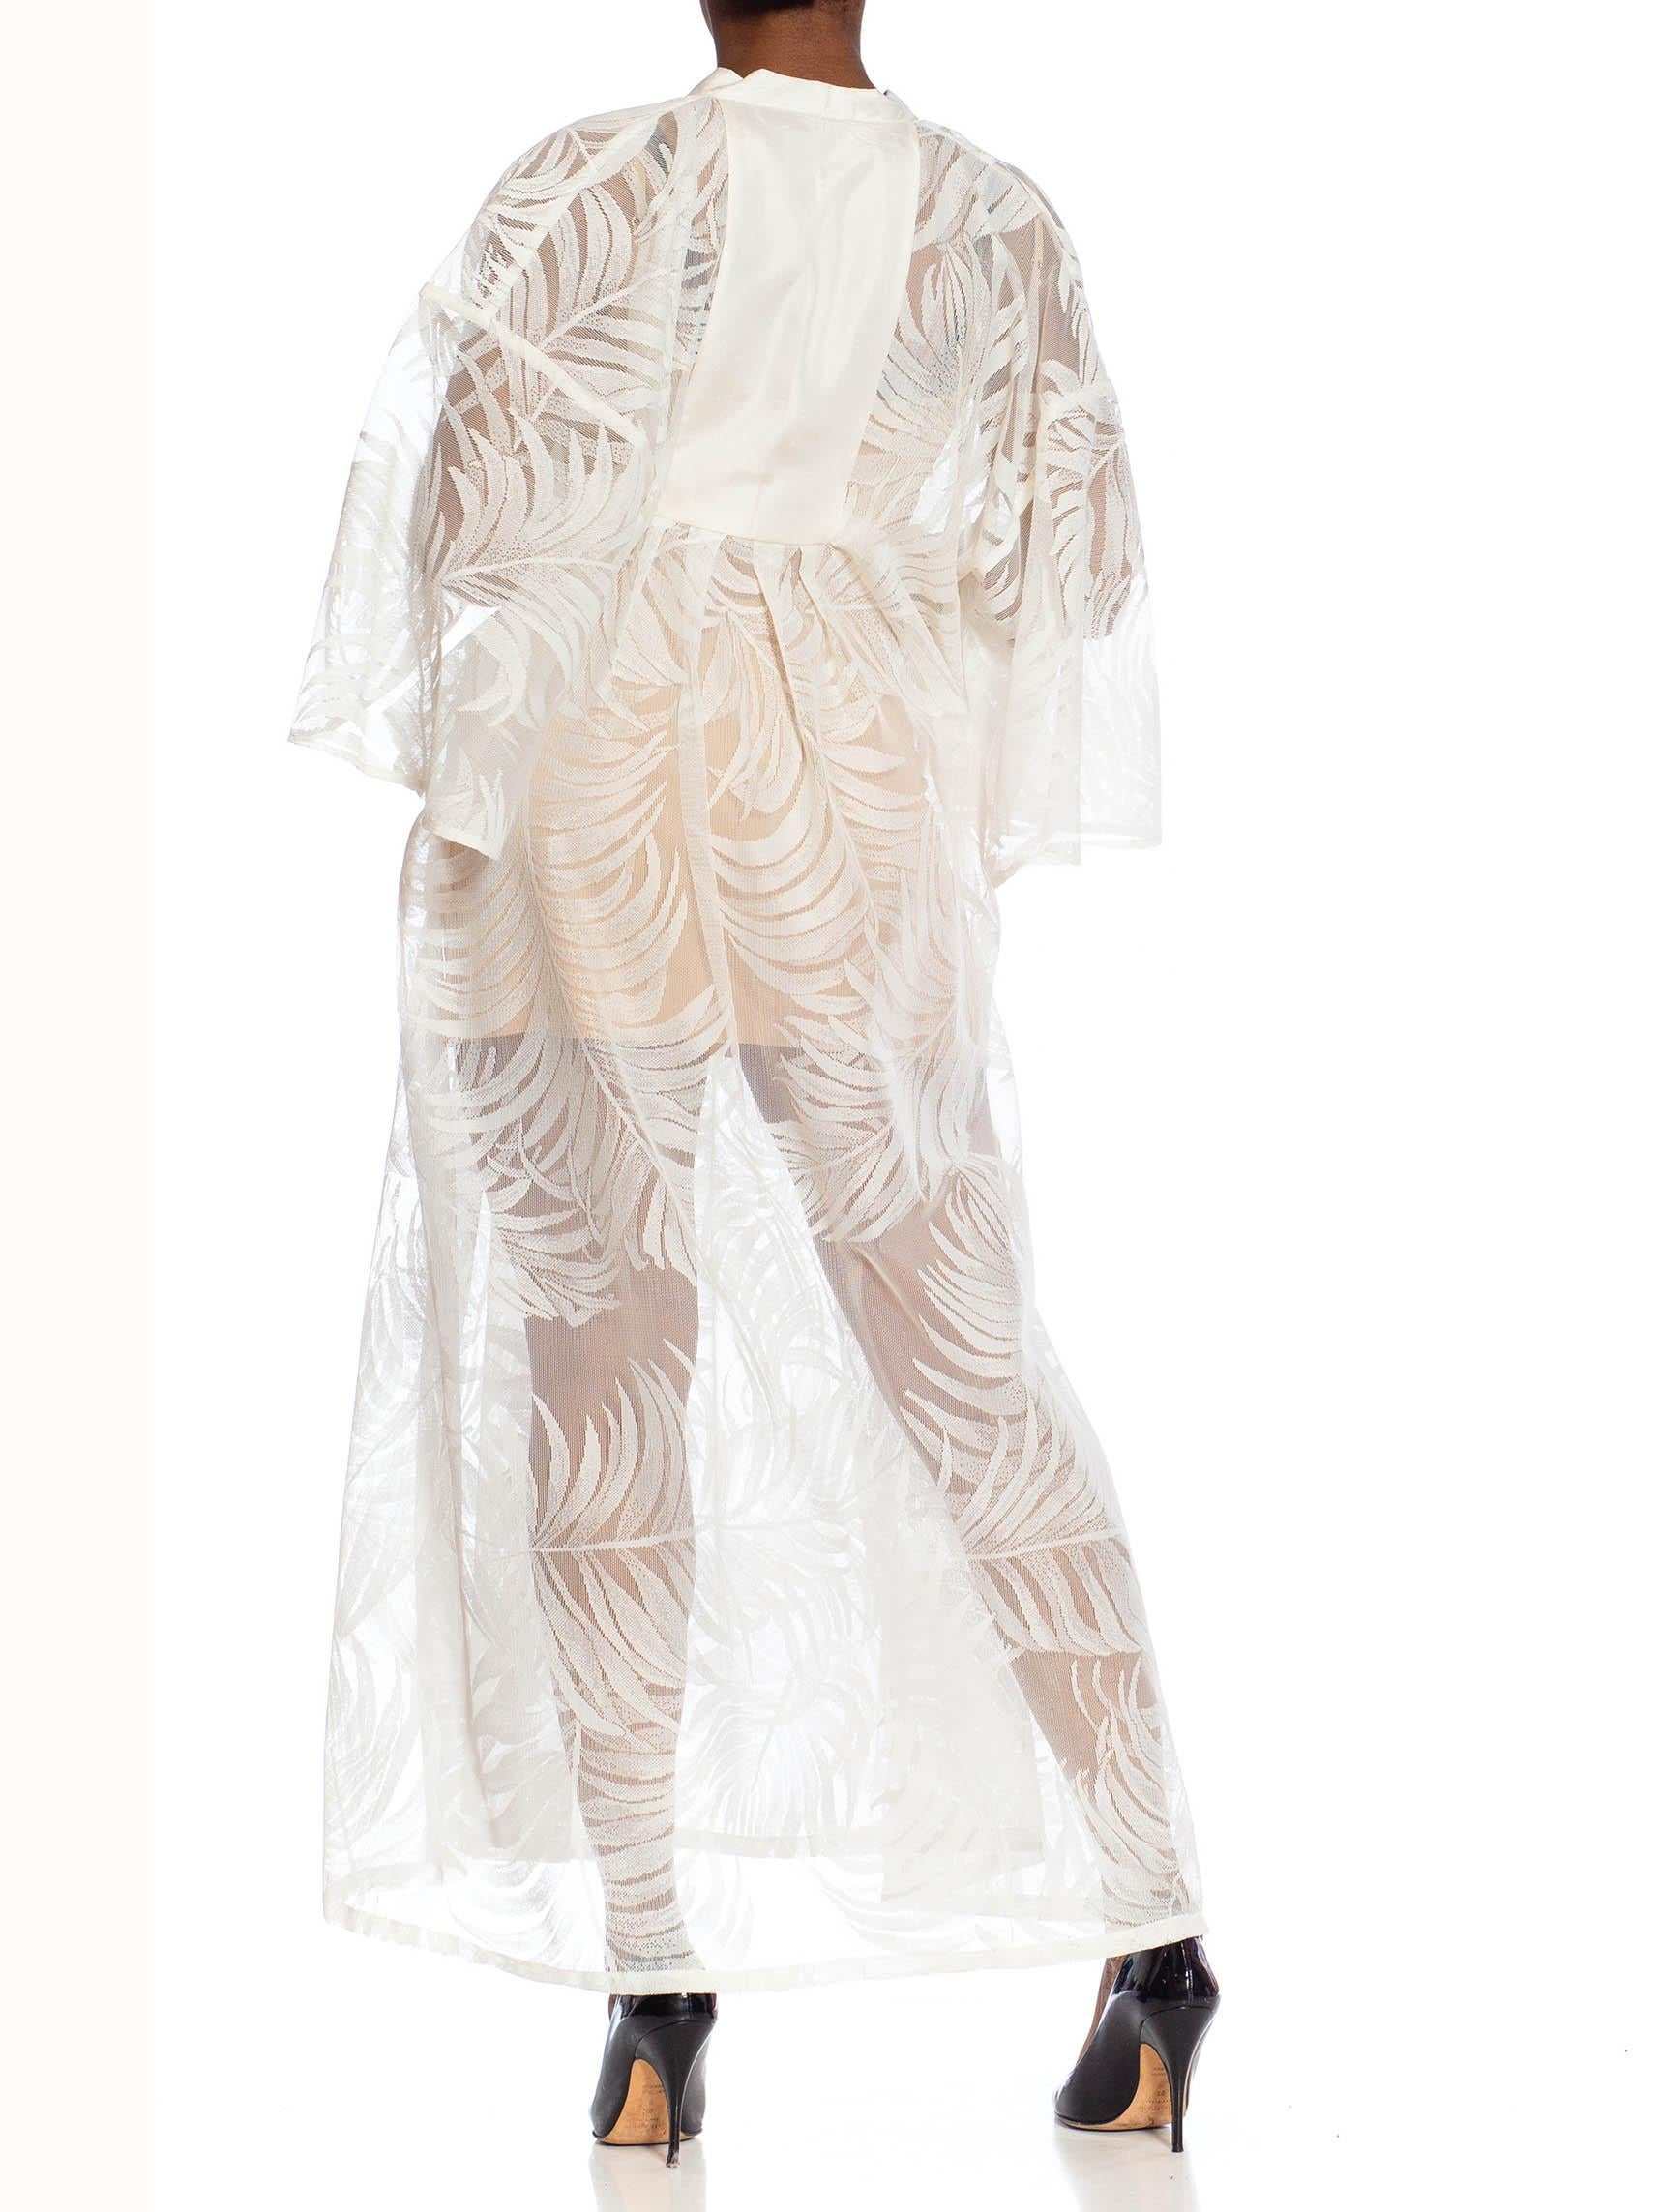 MORPHEW COLLECTION White Poly/Nylon Tropical Foliage Lace Kaftan In Excellent Condition For Sale In New York, NY